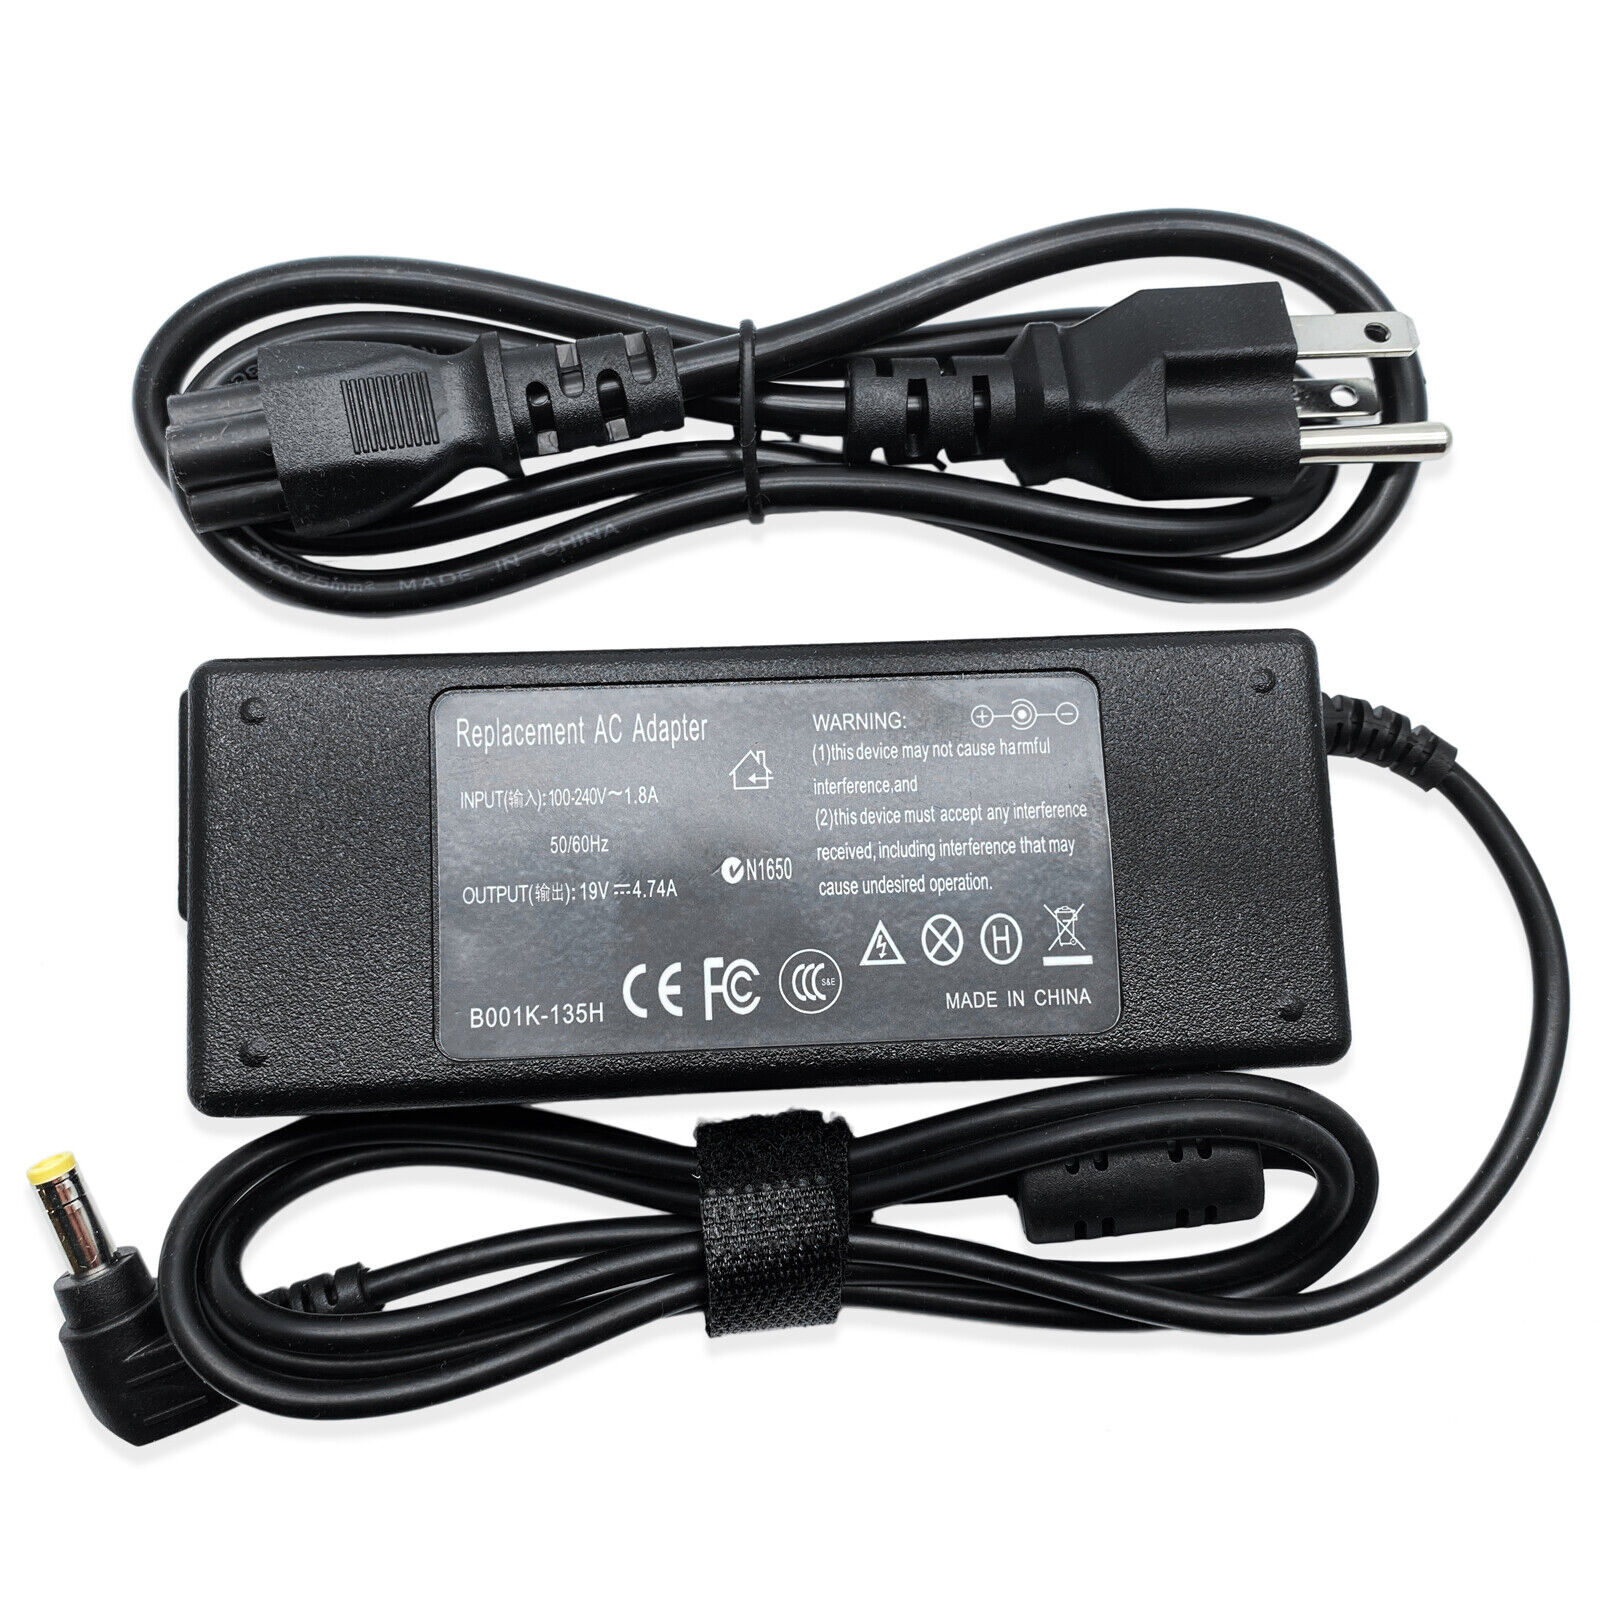 AC Adapter Charger For Getac B300 G4 G5 G6 G7 B300X Rugged Notebook Power Cord